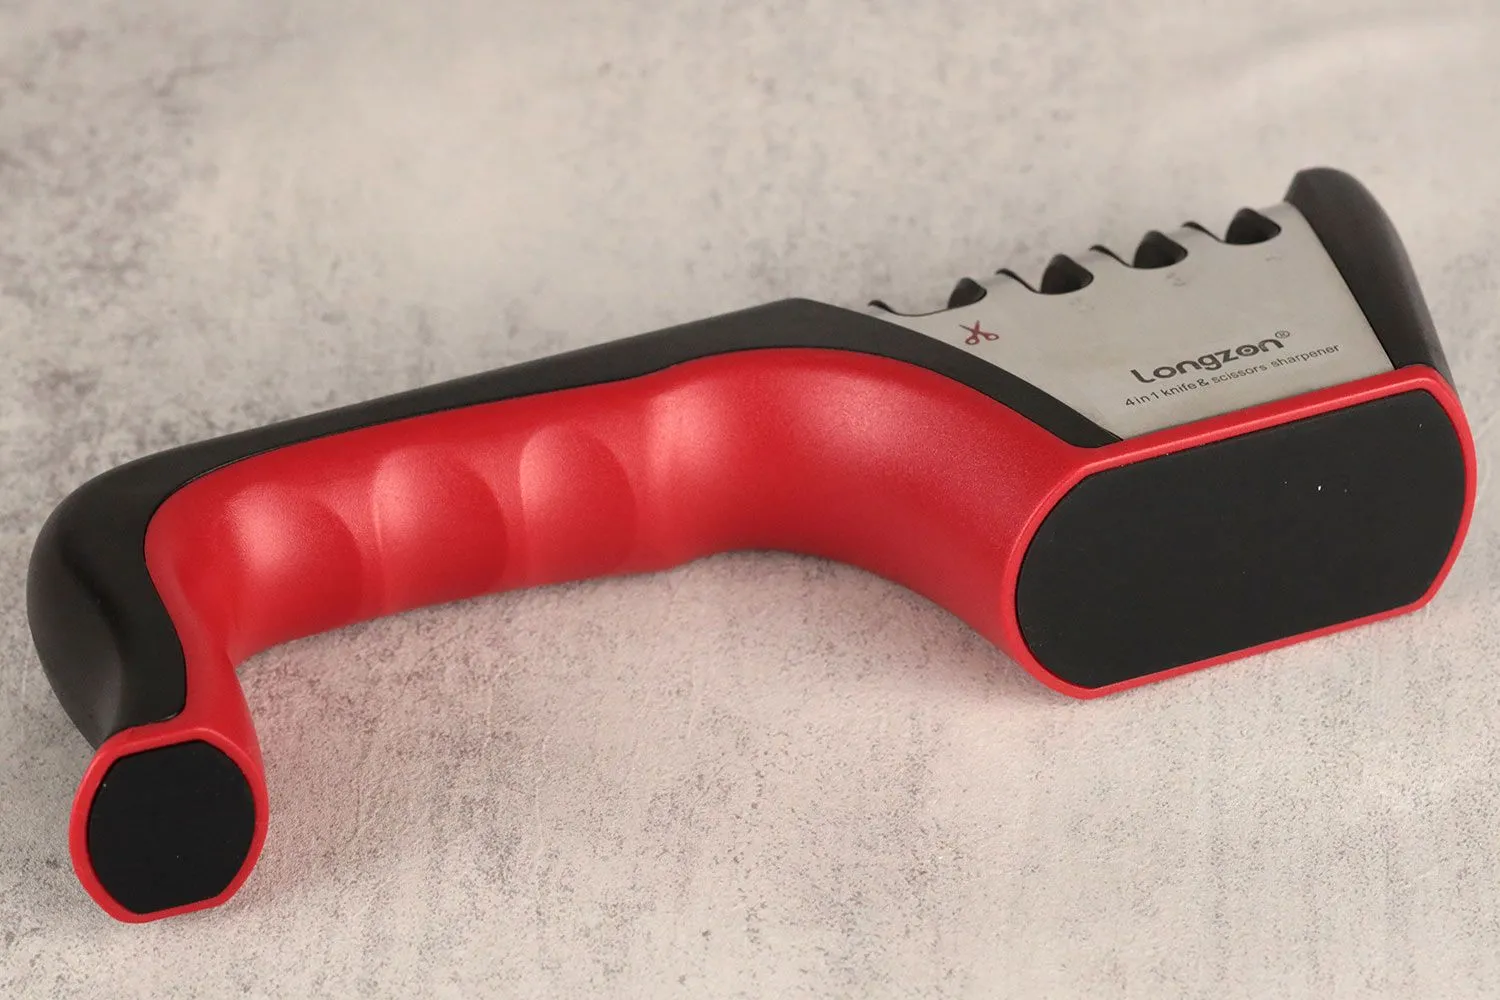 Longzon 4-in-1 [4 stage] Knife Sharpener with a Pair of Cut